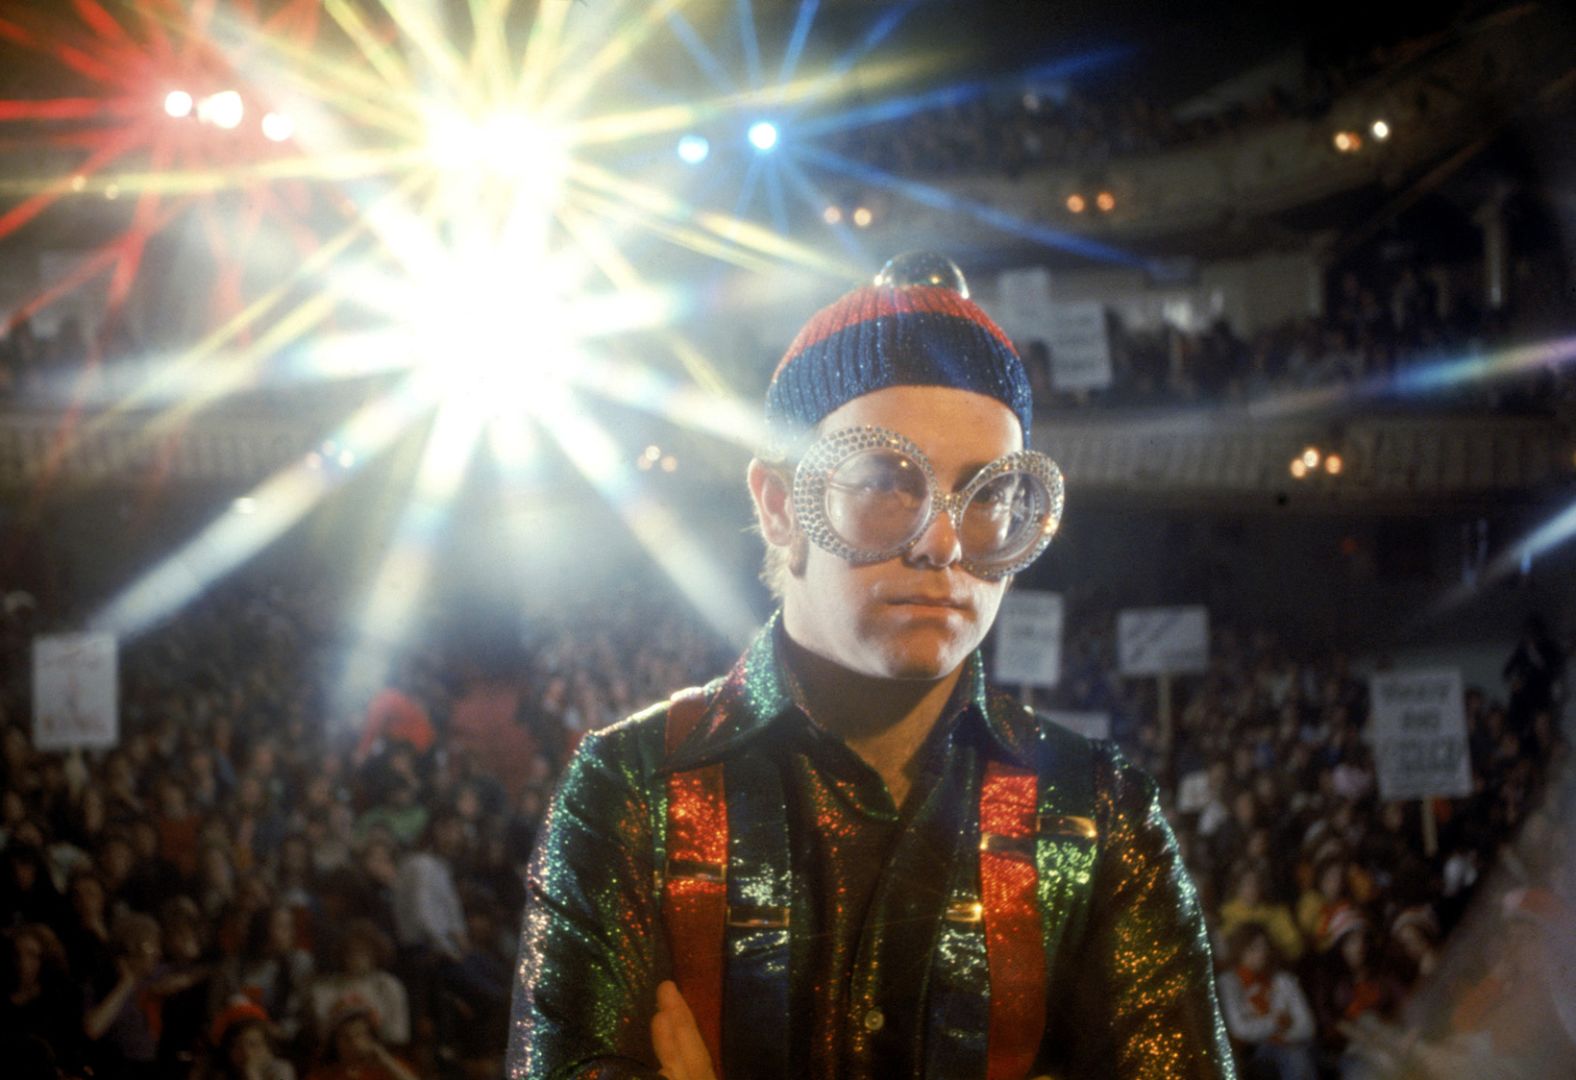 John plays the Pinball Wizard in the 1975 film "Tommy," which is based on The Who's album of the same name.